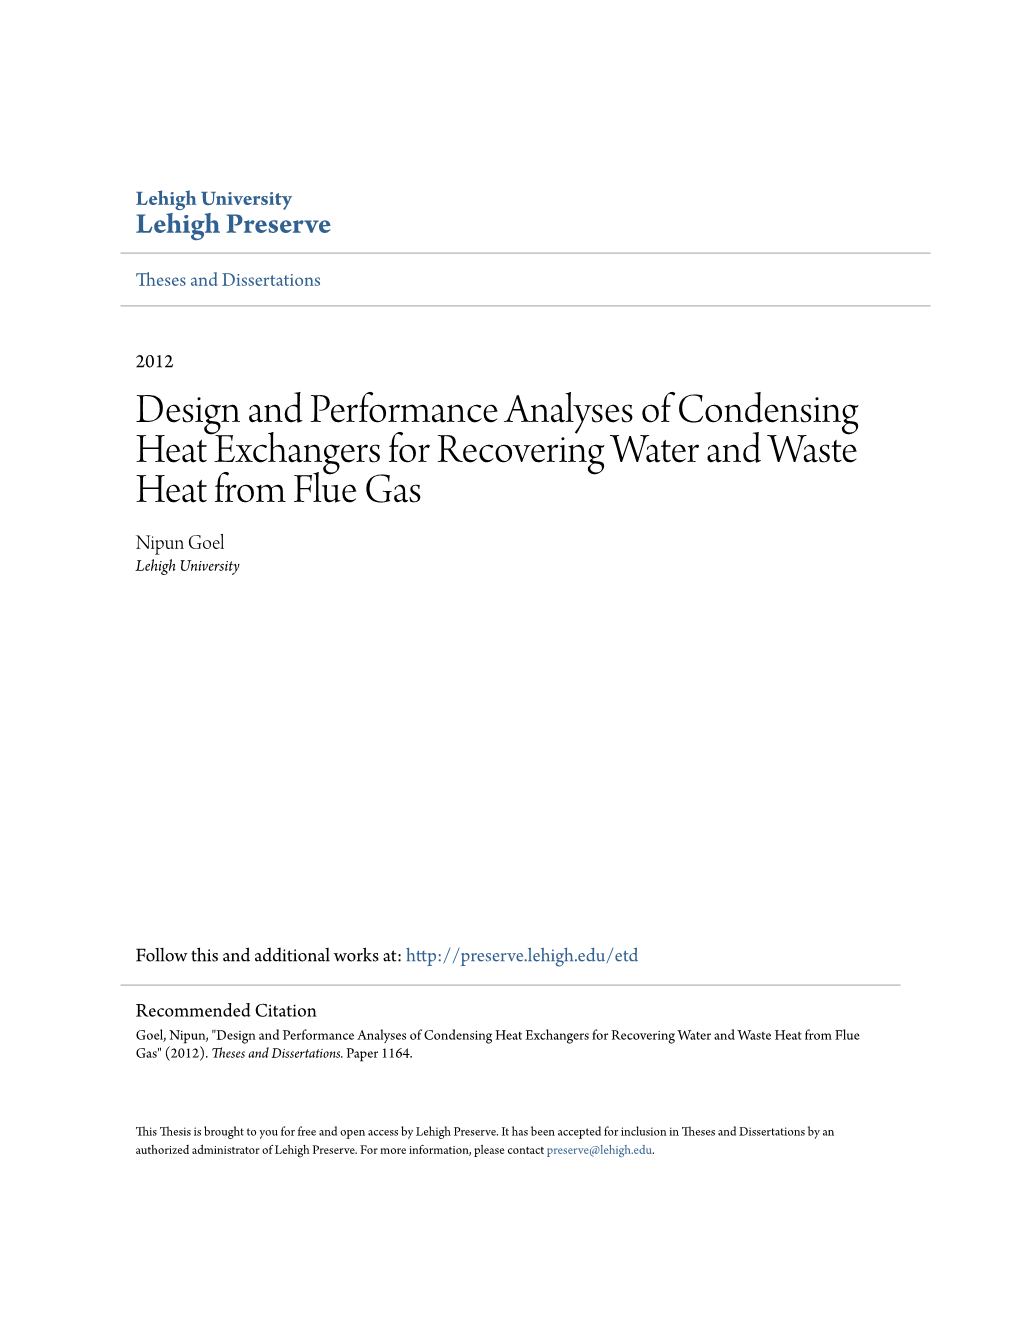 Design and Performance Analyses of Condensing Heat Exchangers for Recovering Water and Waste Heat from Flue Gas Nipun Goel Lehigh University